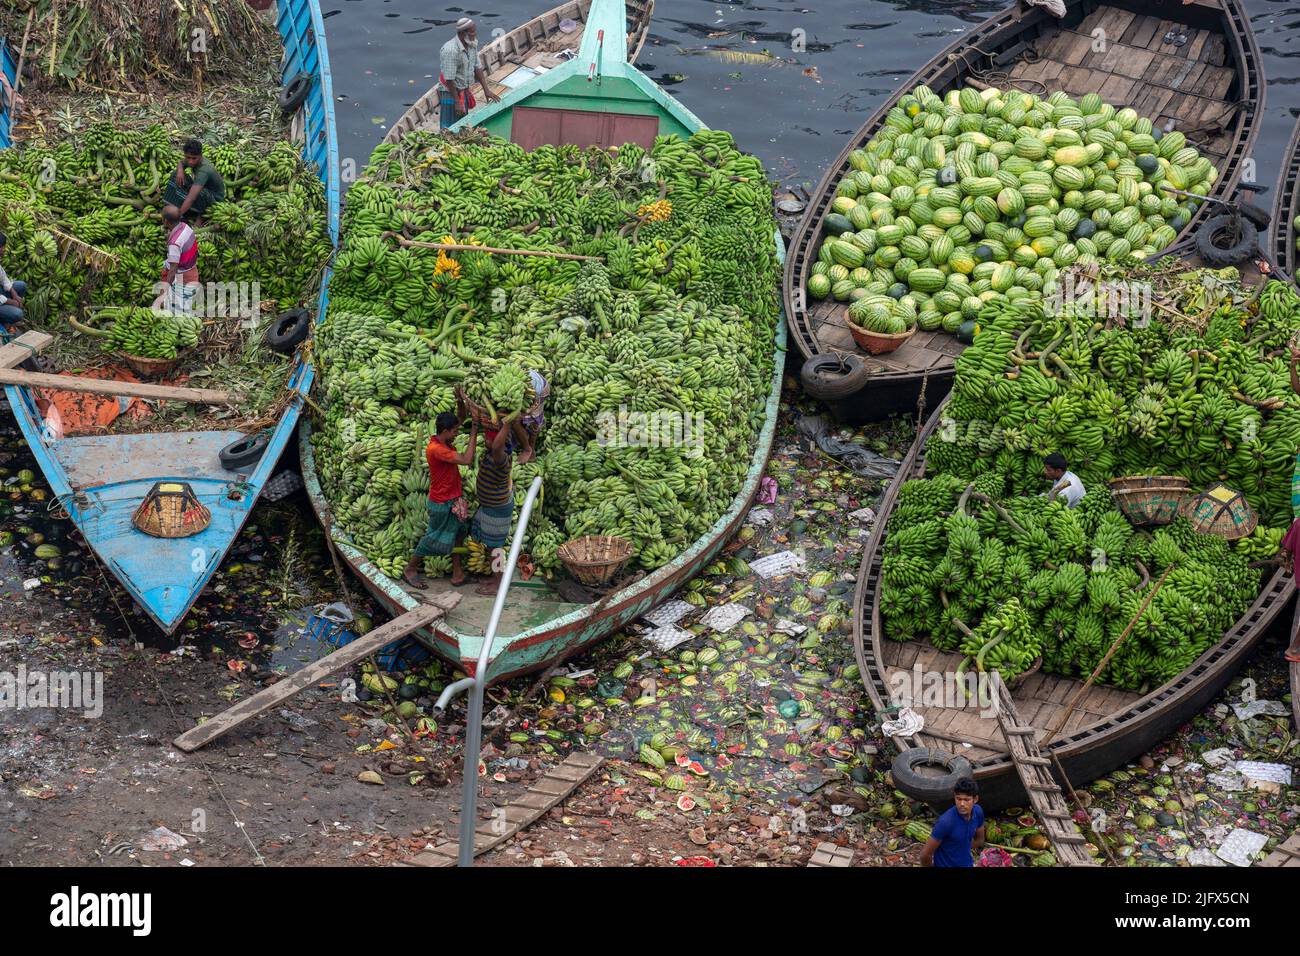 Workers are busy offloading seasonal fruits from boats at Wiseghat in Old Dhaka. Bangladesh Stock Photo